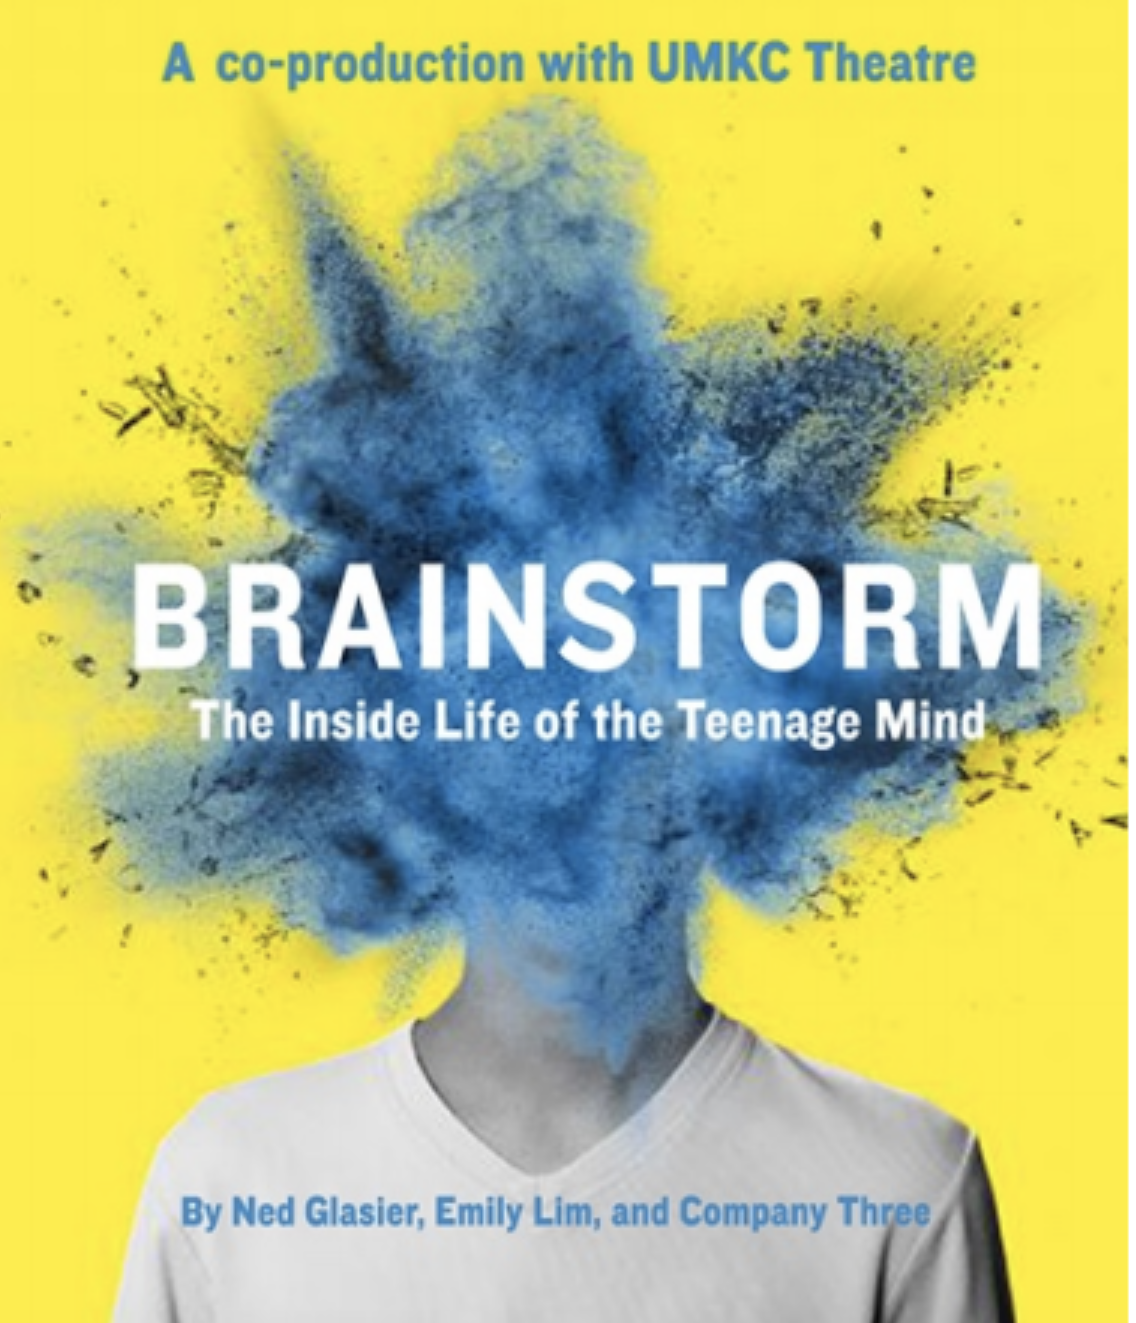 Explore the true teen thought process within BRAINSTORM: The Inside Life of the Teenage Mind